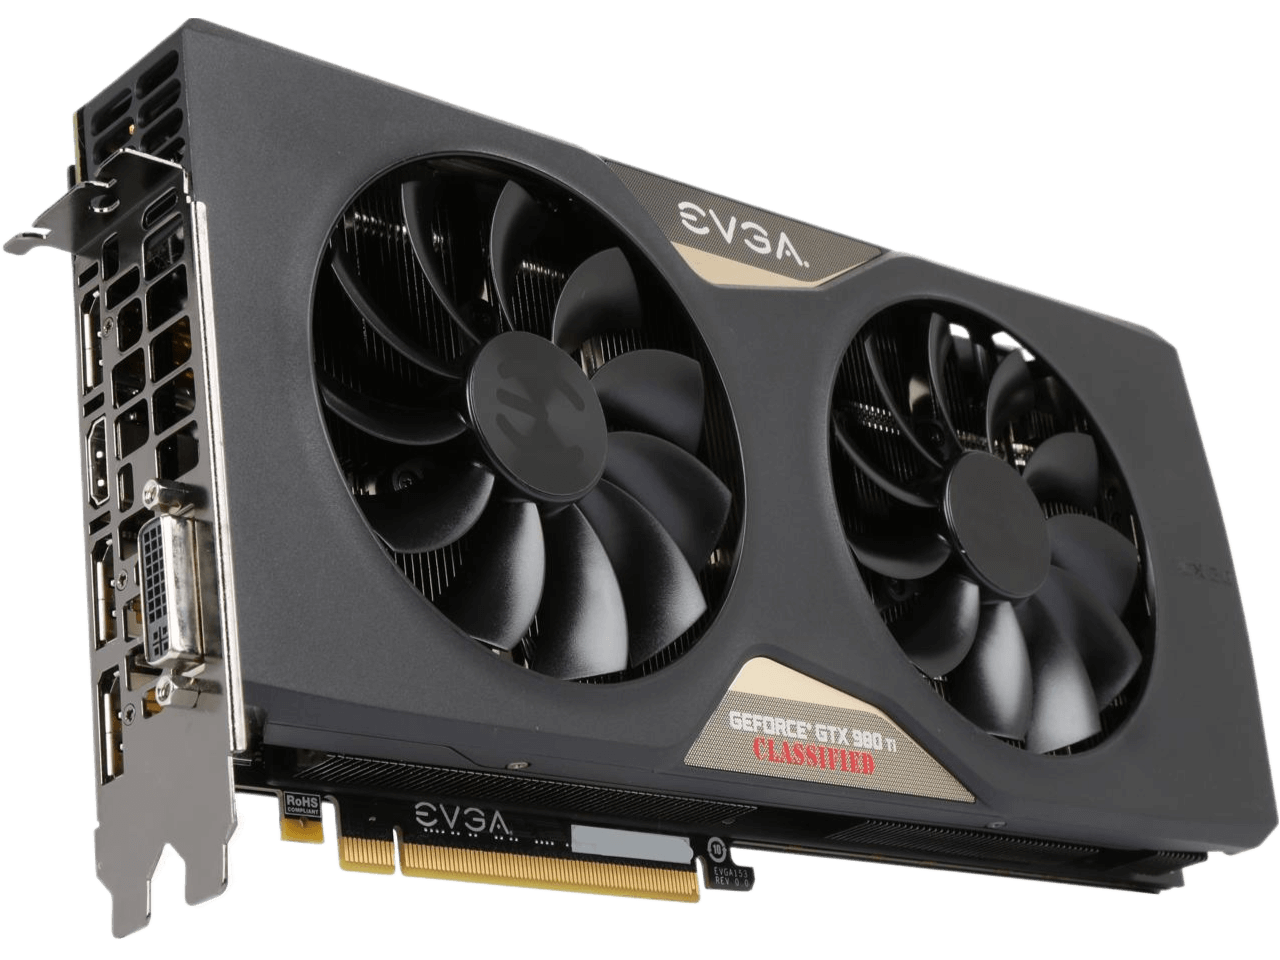 EVGA GeForce GTX 980 Ti 6GB CLASSIFIED GAMING w/ACX 2.0+, Whisper Silent Cooling w/ Free Installed Backplate Graphics Card 06G-P4-4998-KR